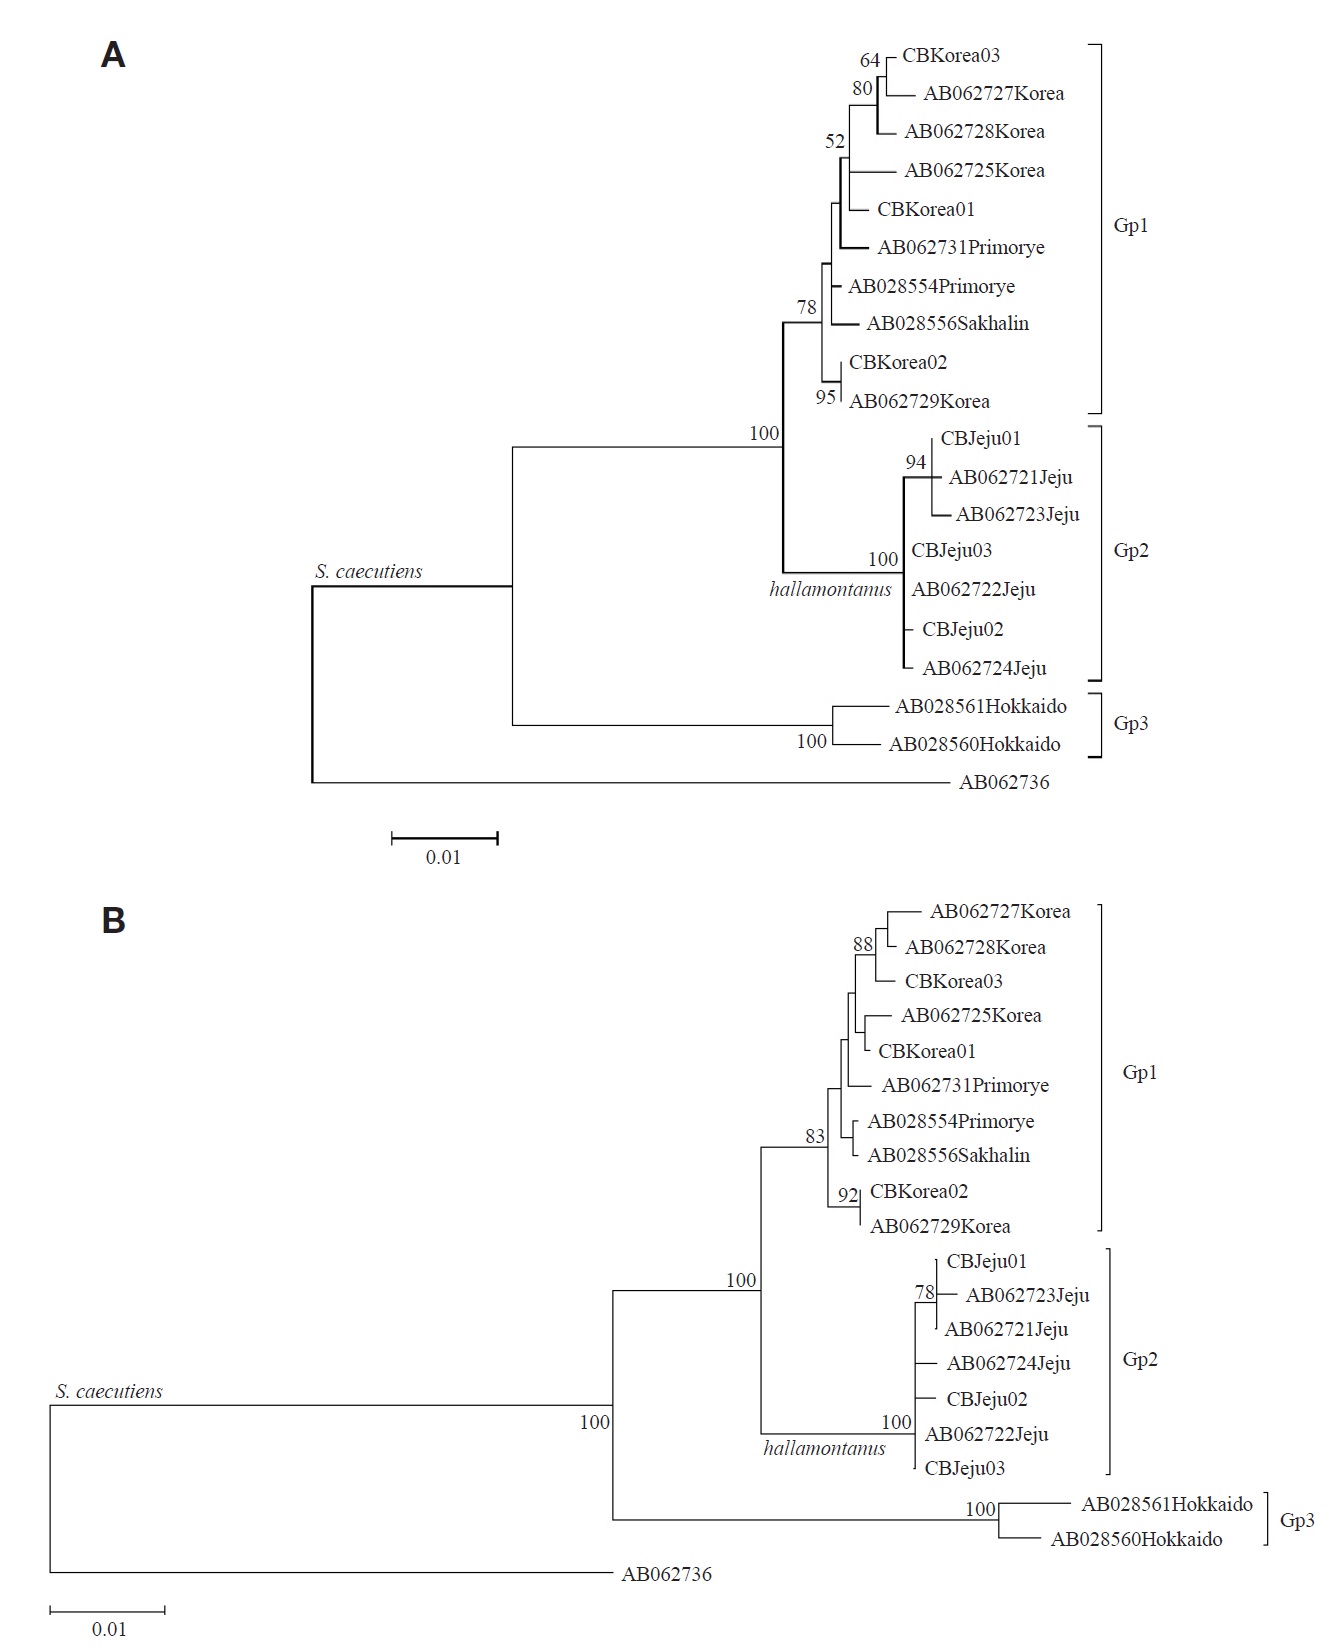 Maximum likelihood trees with 19 cytochrome b haplotypes (1,140 bp) of Sorex caecutiens. The two trees (A and B) were constructed by MEGA5 and PAUP 4.10b, respectively, and the bootstrap values > 50% are reported at the internodes. Six haplotypes (CBKorea01-CBKorea03 and CBJeju01-CBJeju03) were obtained from this study, and for other 13 haplotypes obtained from GenBank, location name follows the accession number in each haplotype. Sorex isodon (AB062736) was used as outgroup.